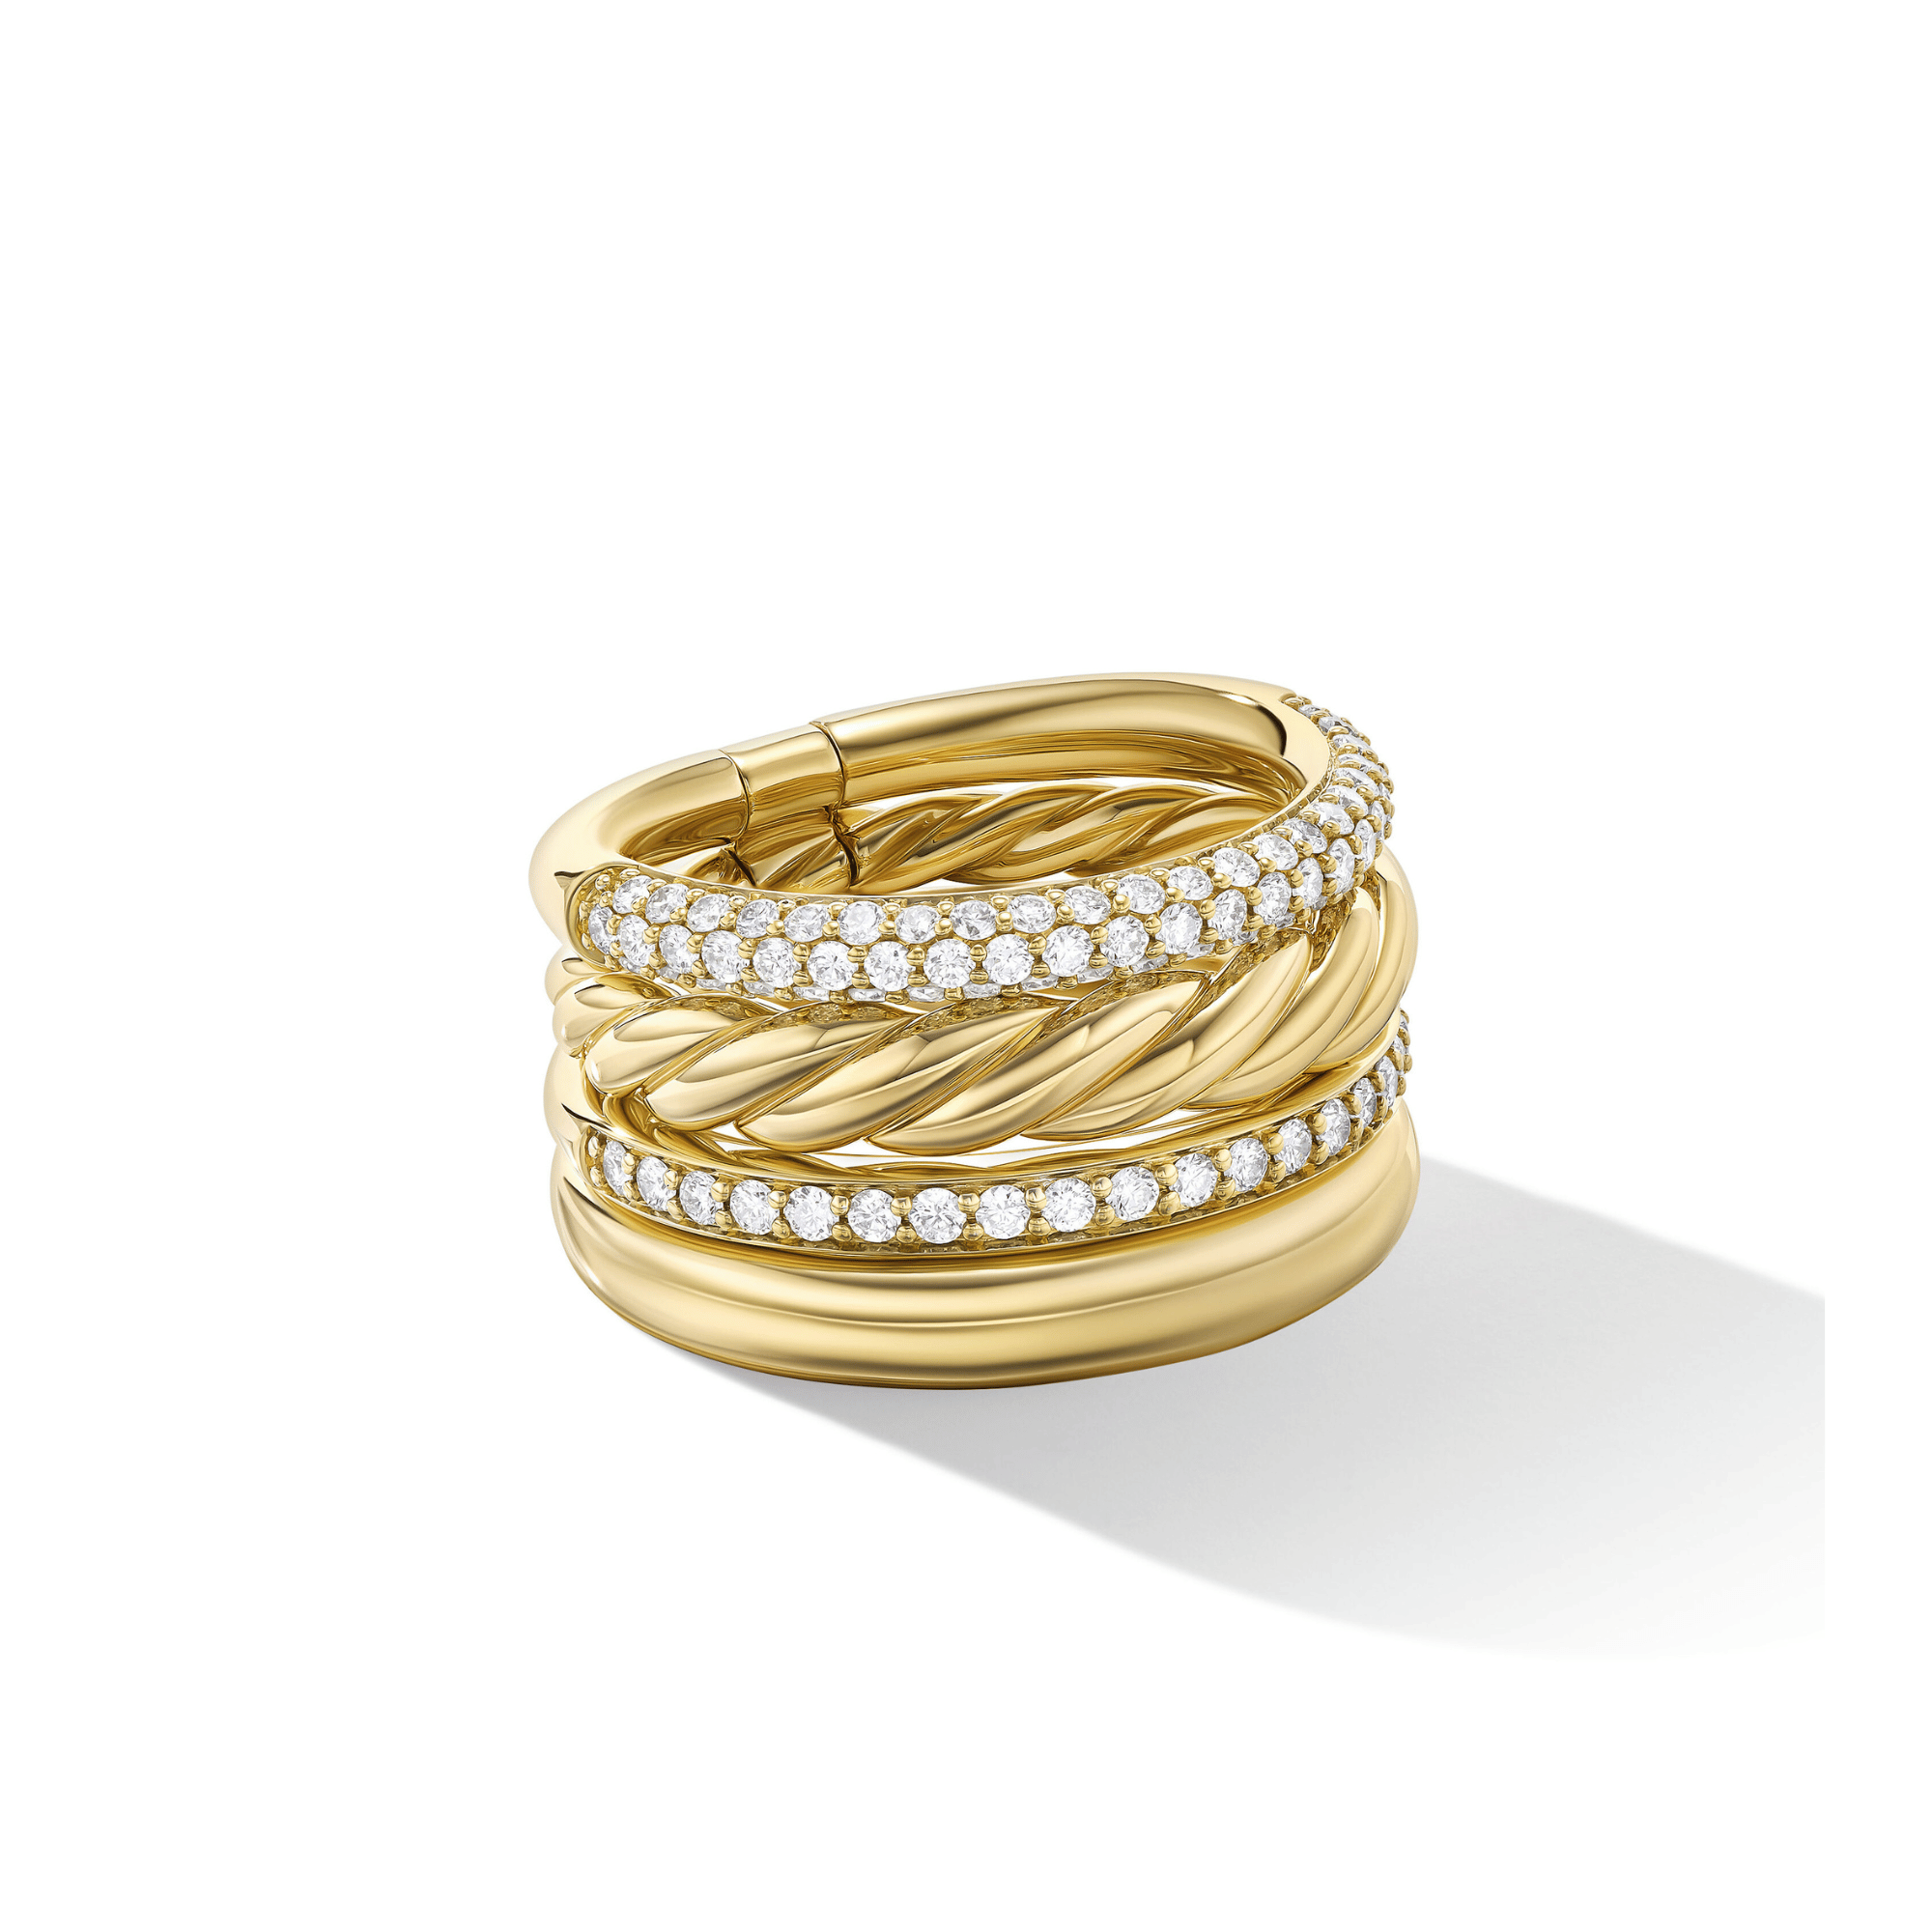 DY Mercer™ Multi Row Ring in 18ct Yellow Gold with Diamonds